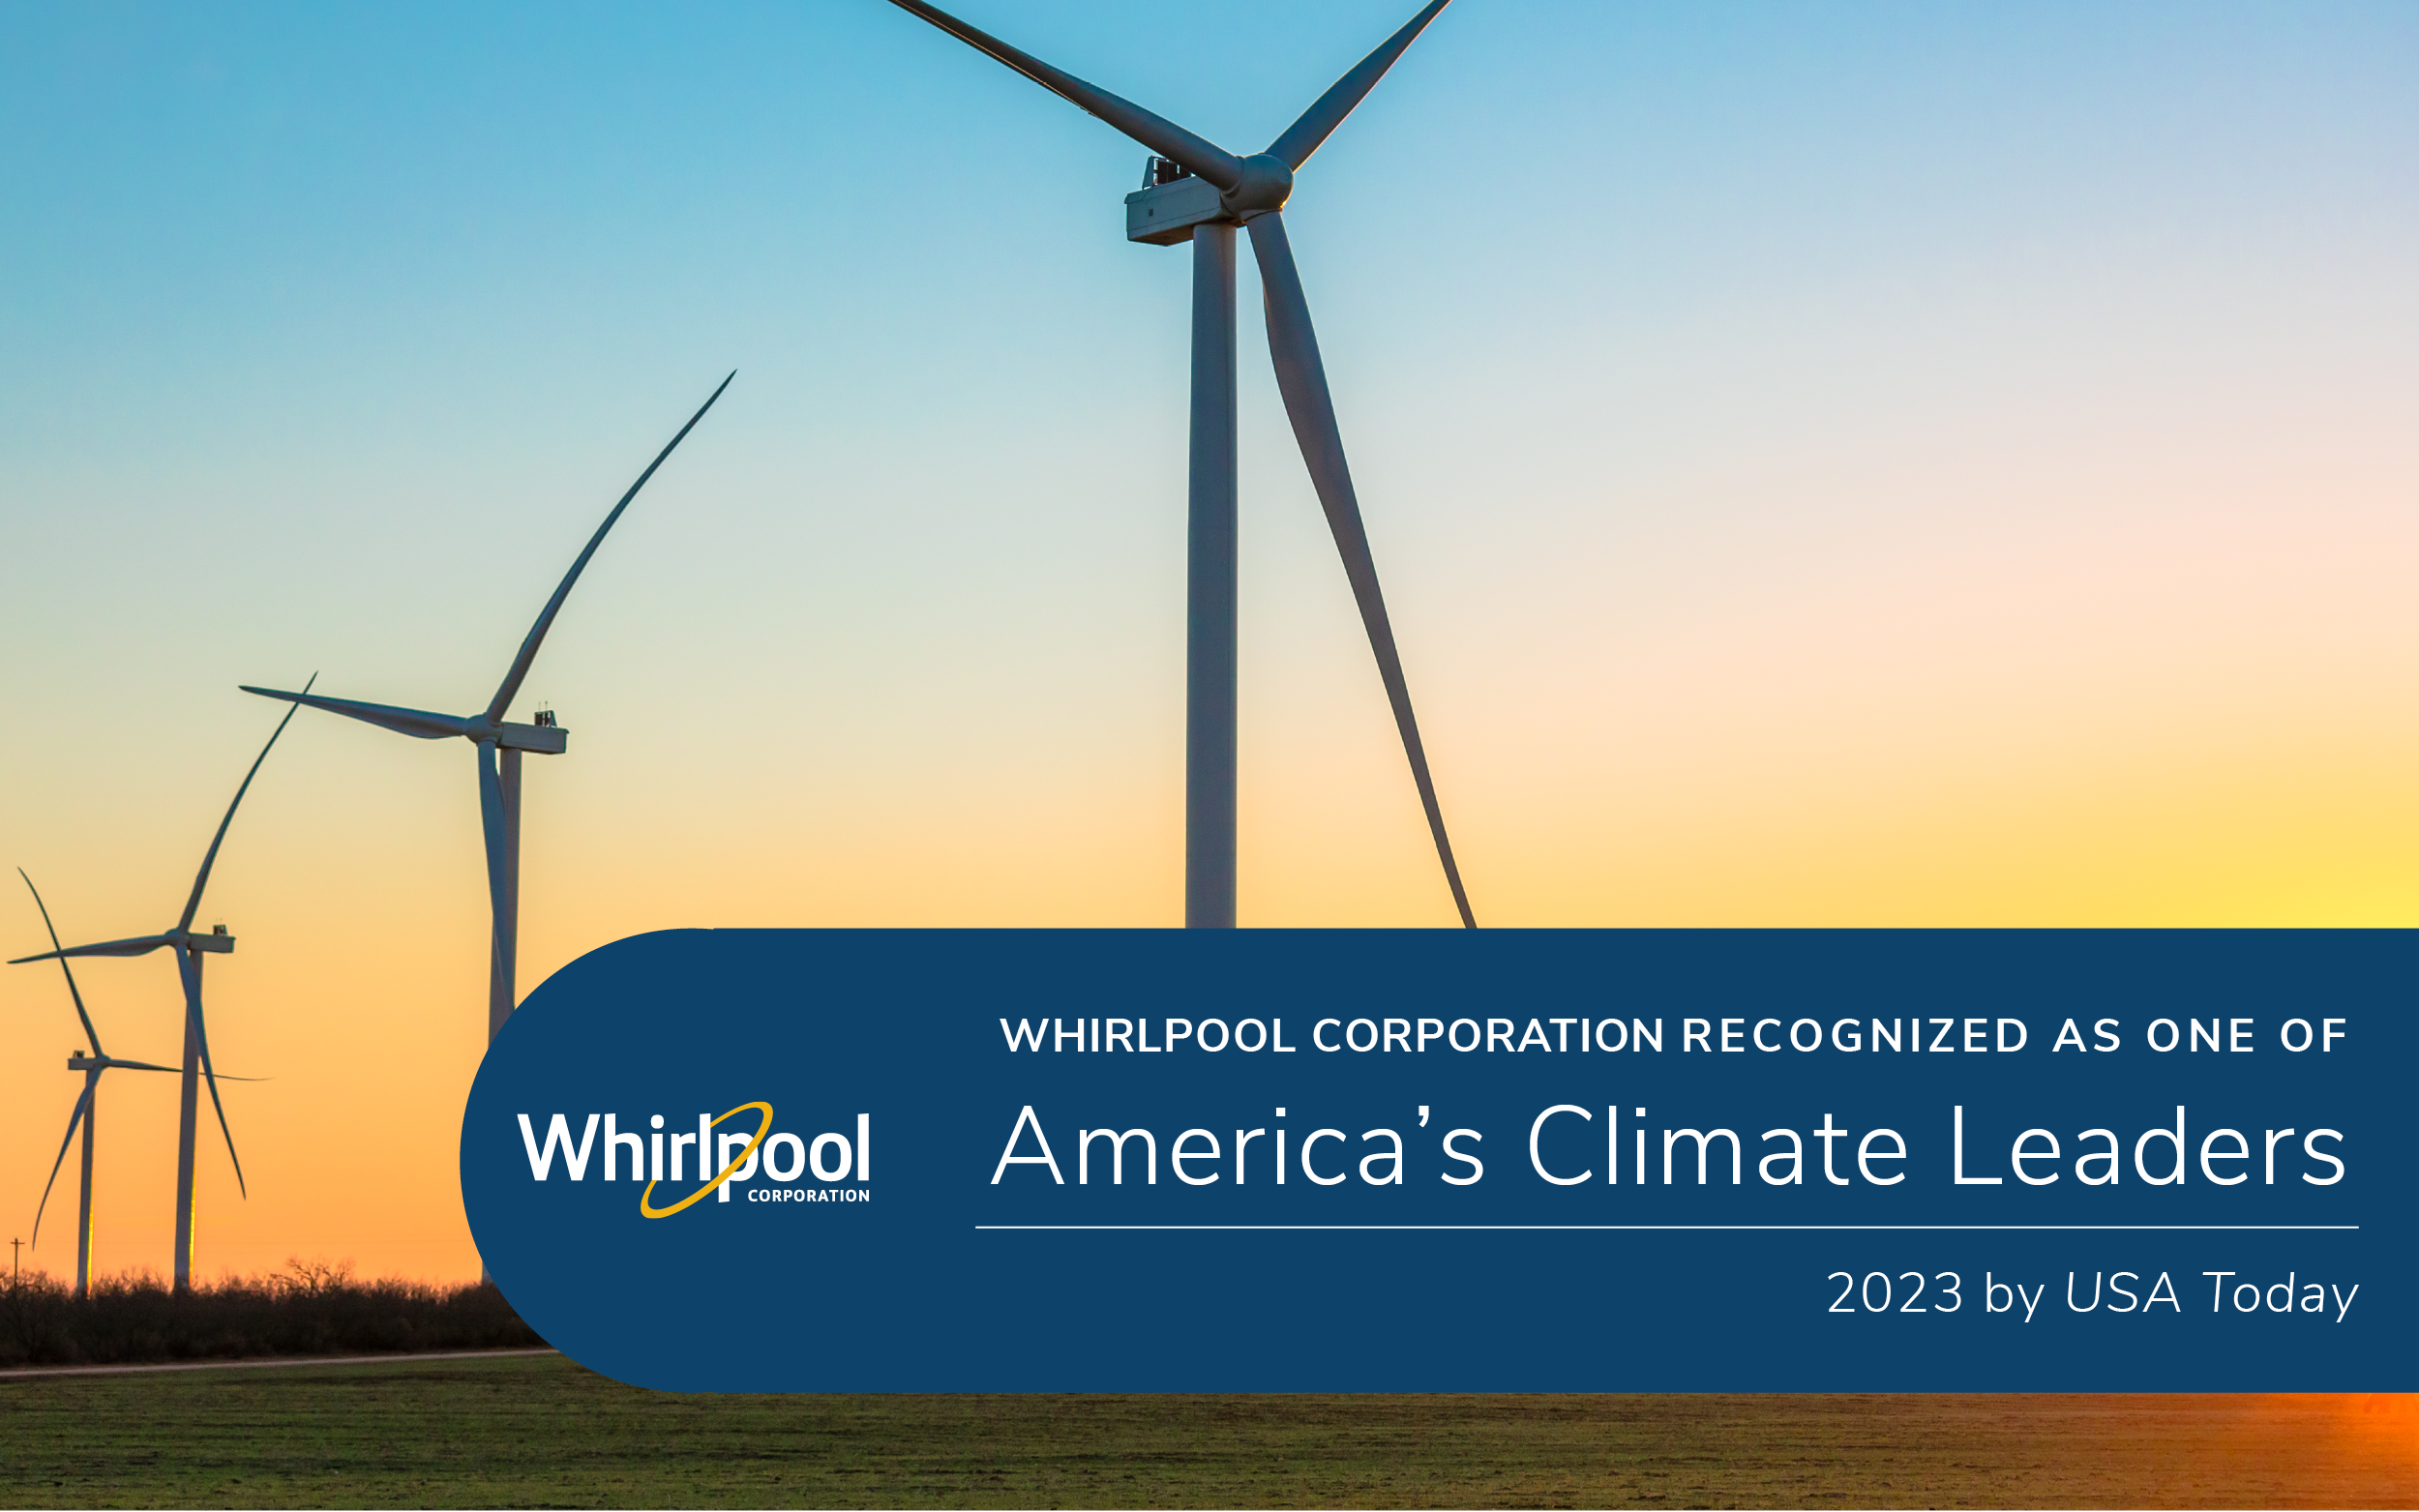 Whirlpool Corporation Recognized as One of America’s Climate Leaders for 2023 by USA Today 3